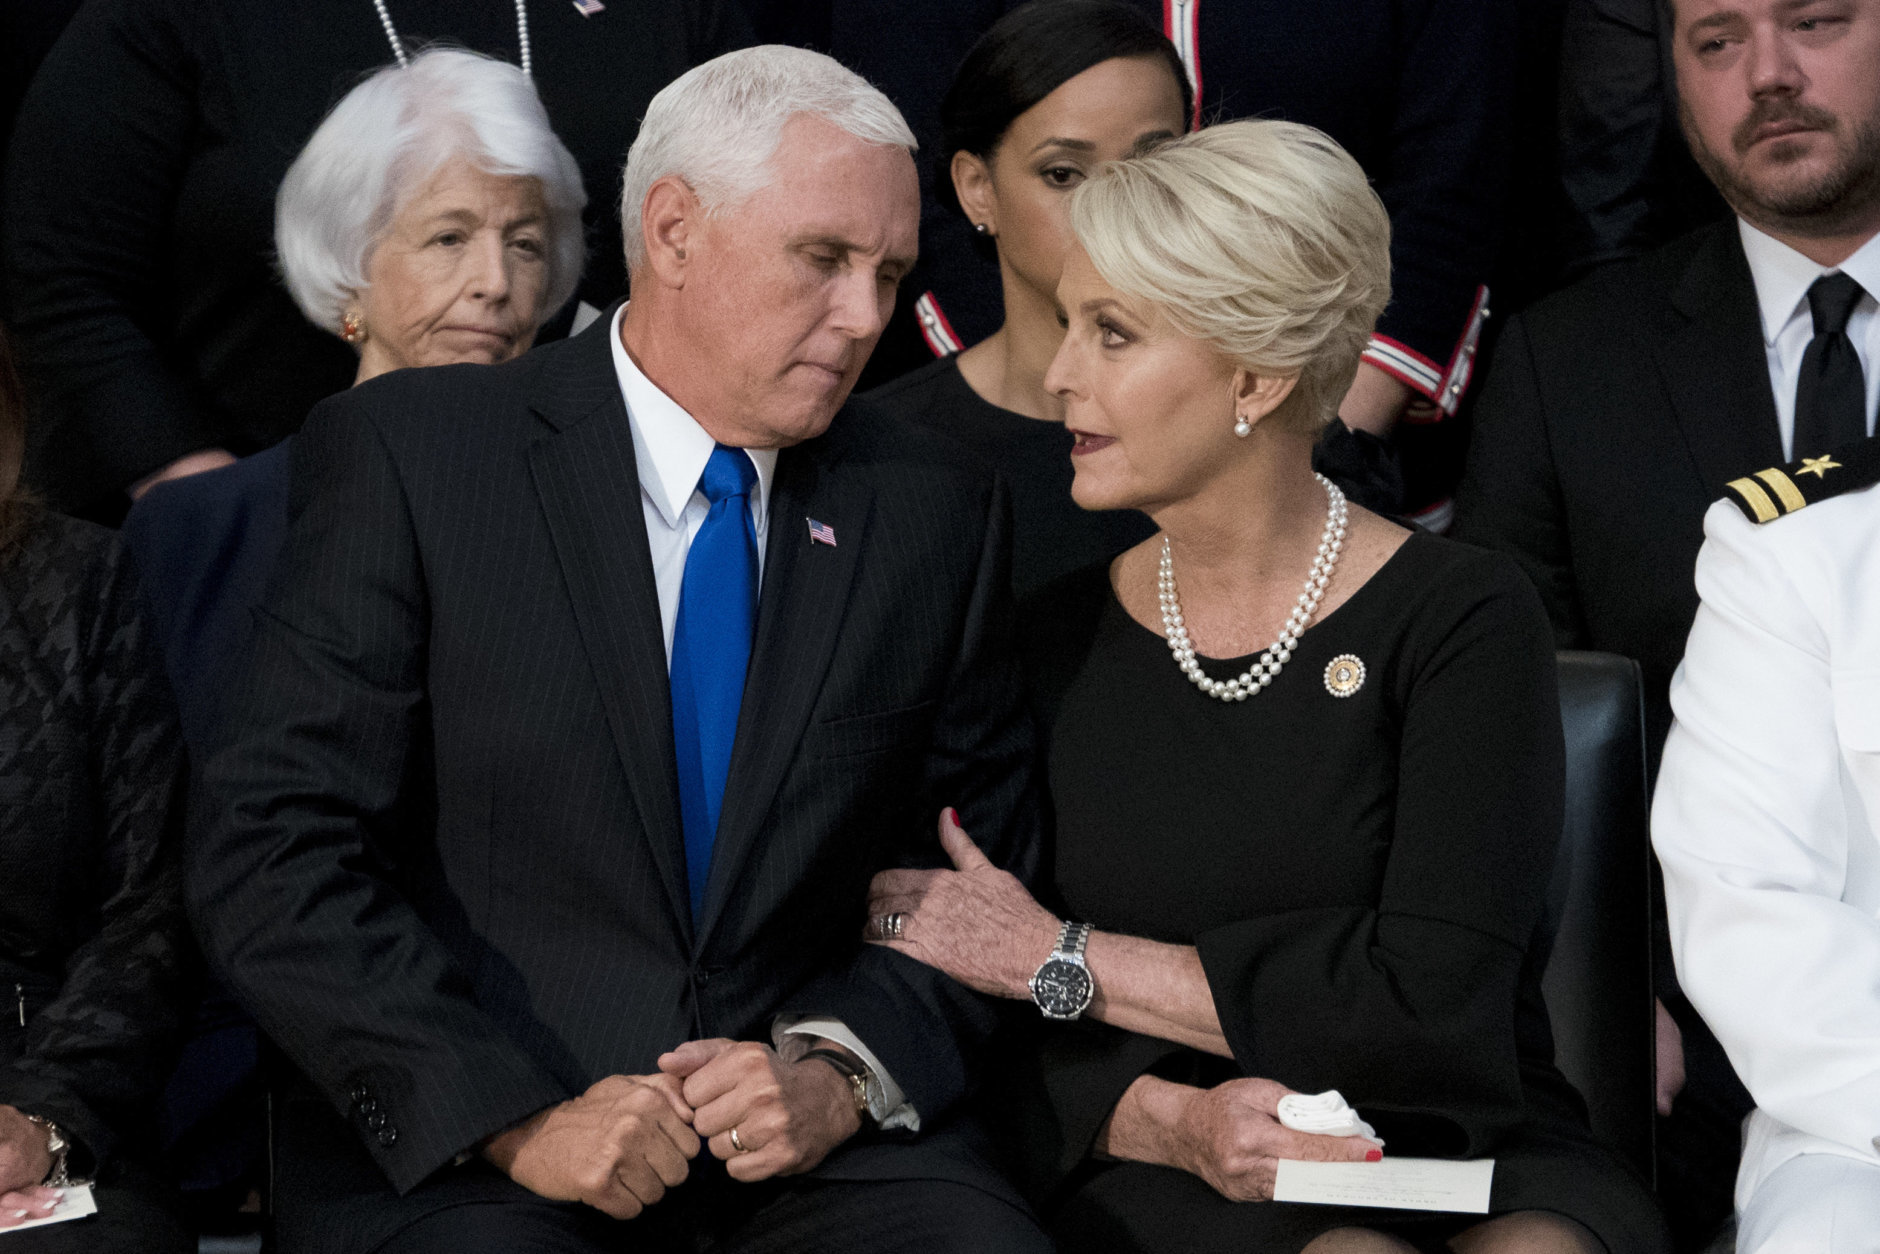 Cindy McCain, wife of Sen. John McCain, R-Ariz., right, talks with Vice President Mike Pence, left, after he speaks at a ceremony for John McCain as he lies in state in the Rotunda of the U.S. Capitol, Friday, Aug. 31, 2018, in Washington. (AP Photo/Andrew Harnik, Pool)